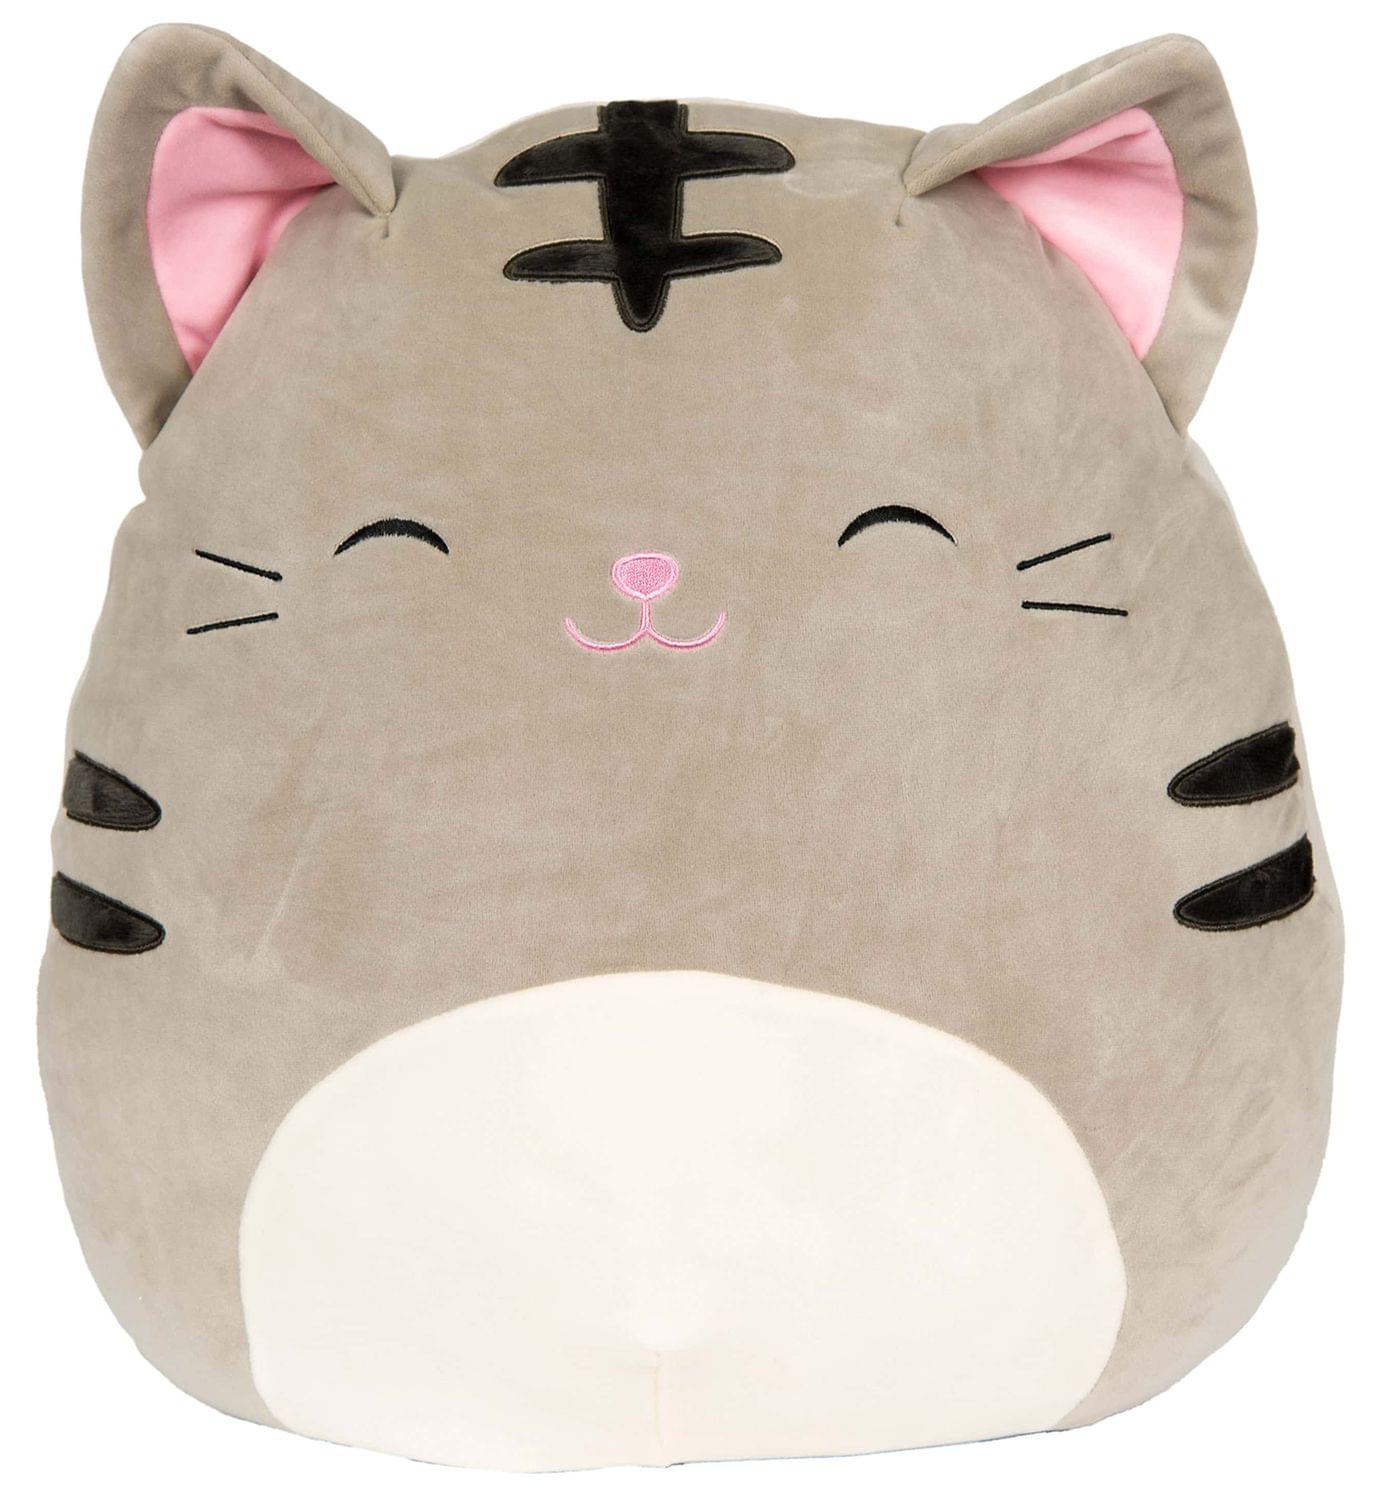 Squishmallow 8 Inch Plush - Tally the Grey Cat